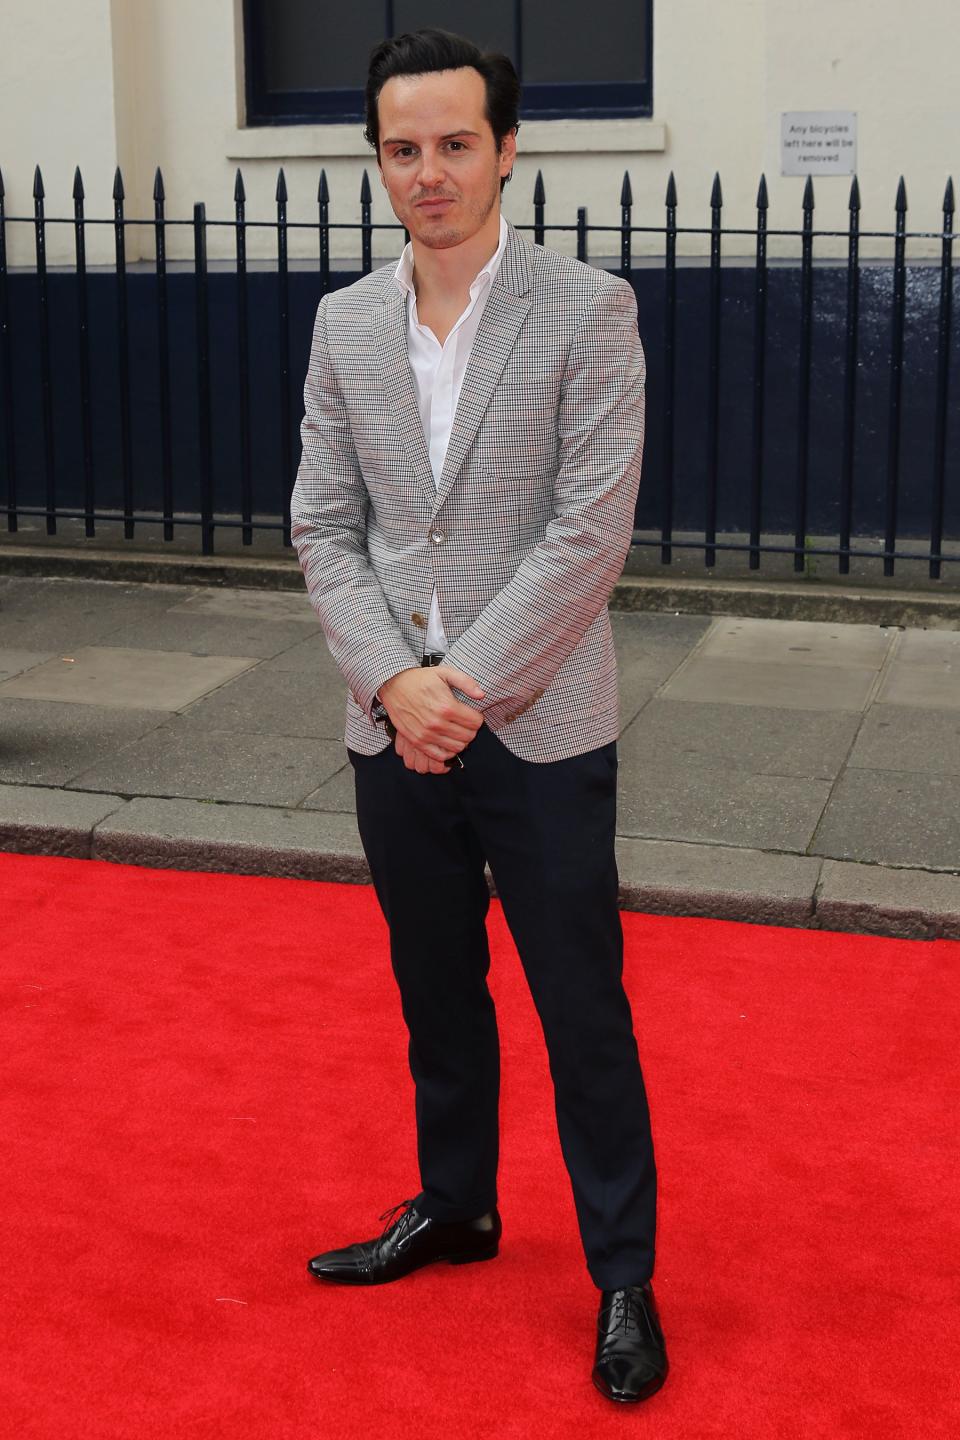 Andrew Scott, dress shoes, blazer, printed blazer, Charlie and the Chocolate Factory, suits, suiting, loafers, brogues, shoes, footwear, menswear, men's style, celebrity style, celebrity red carpet, red carpet, premiere